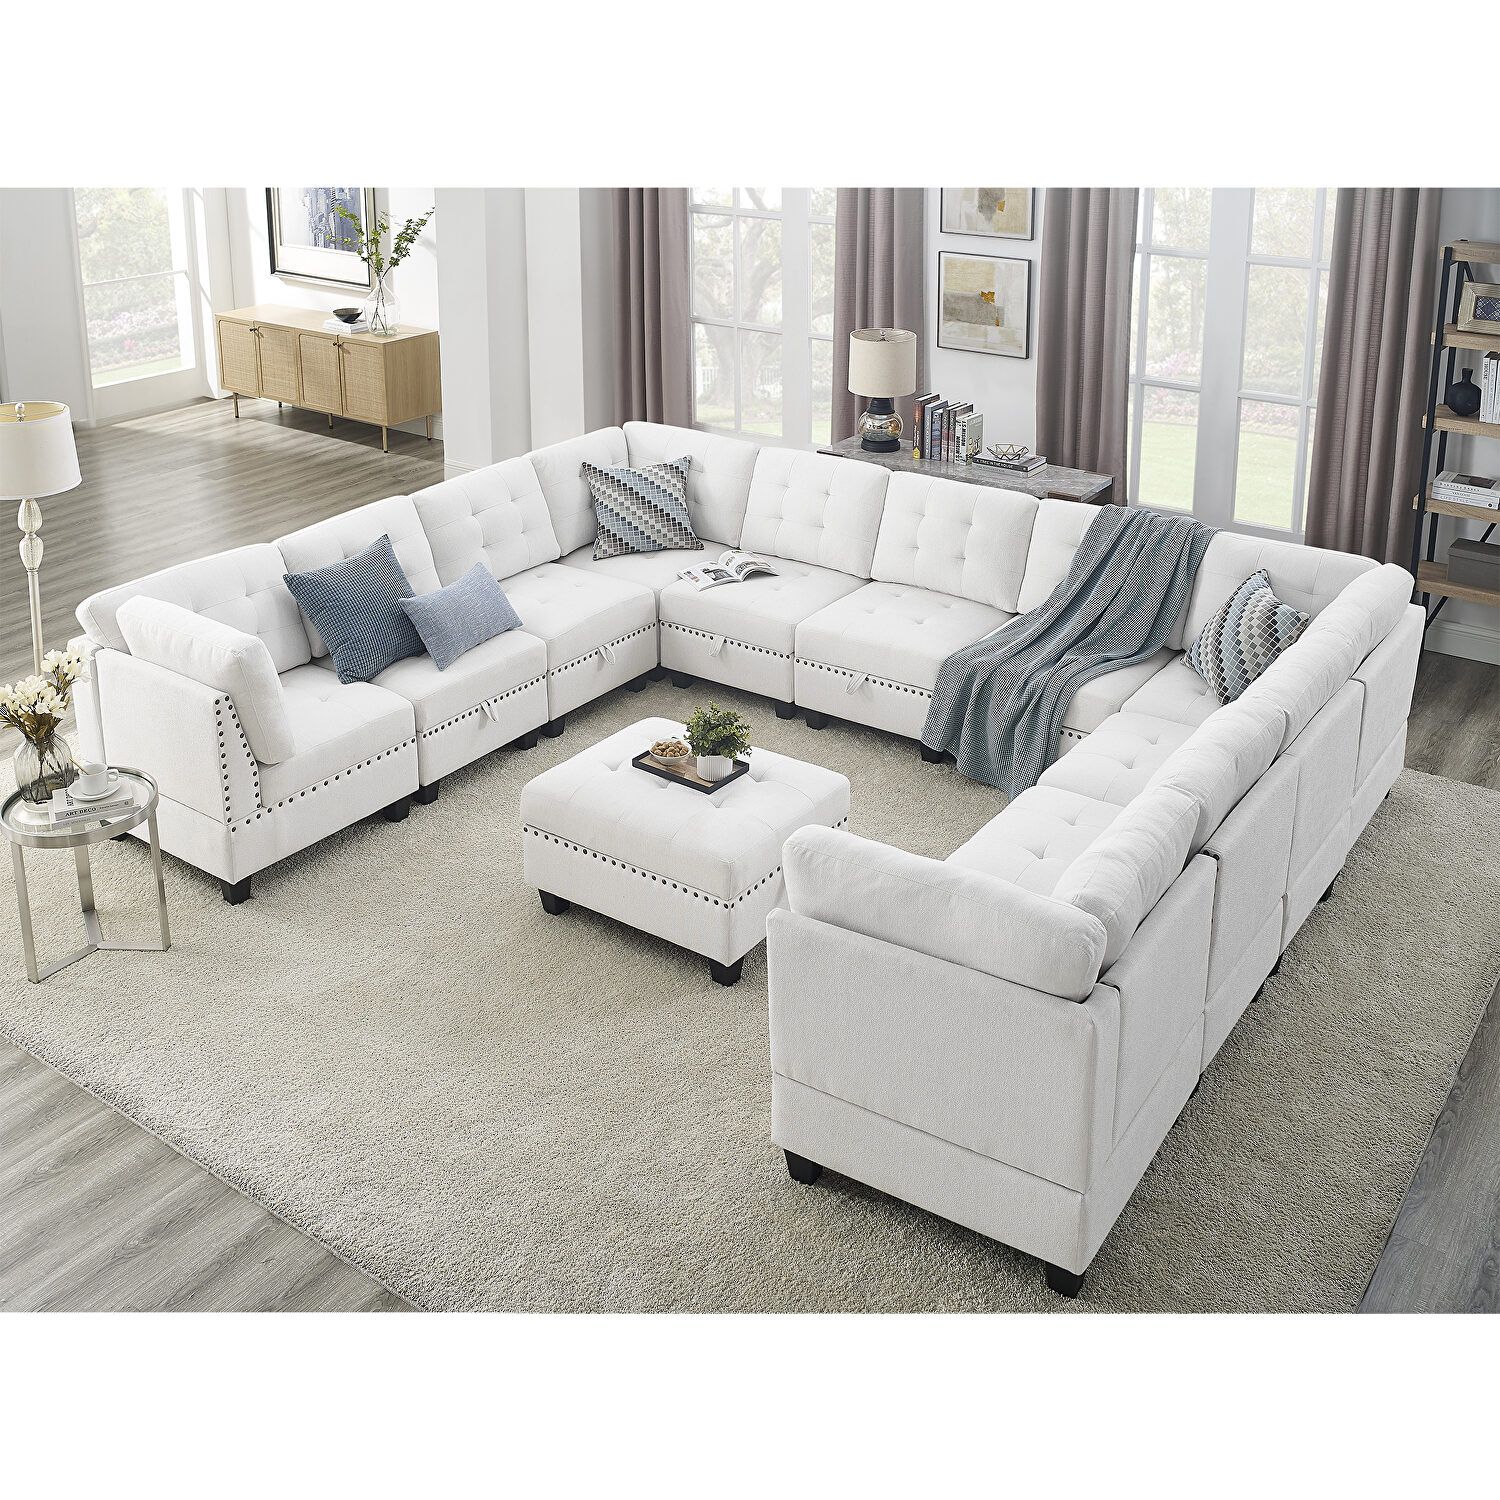 La Spezia Dd240 V Sectional Sofa W487S00125 | Comfyco Intended For U Shaped Modular Sectional Sofas (View 10 of 15)